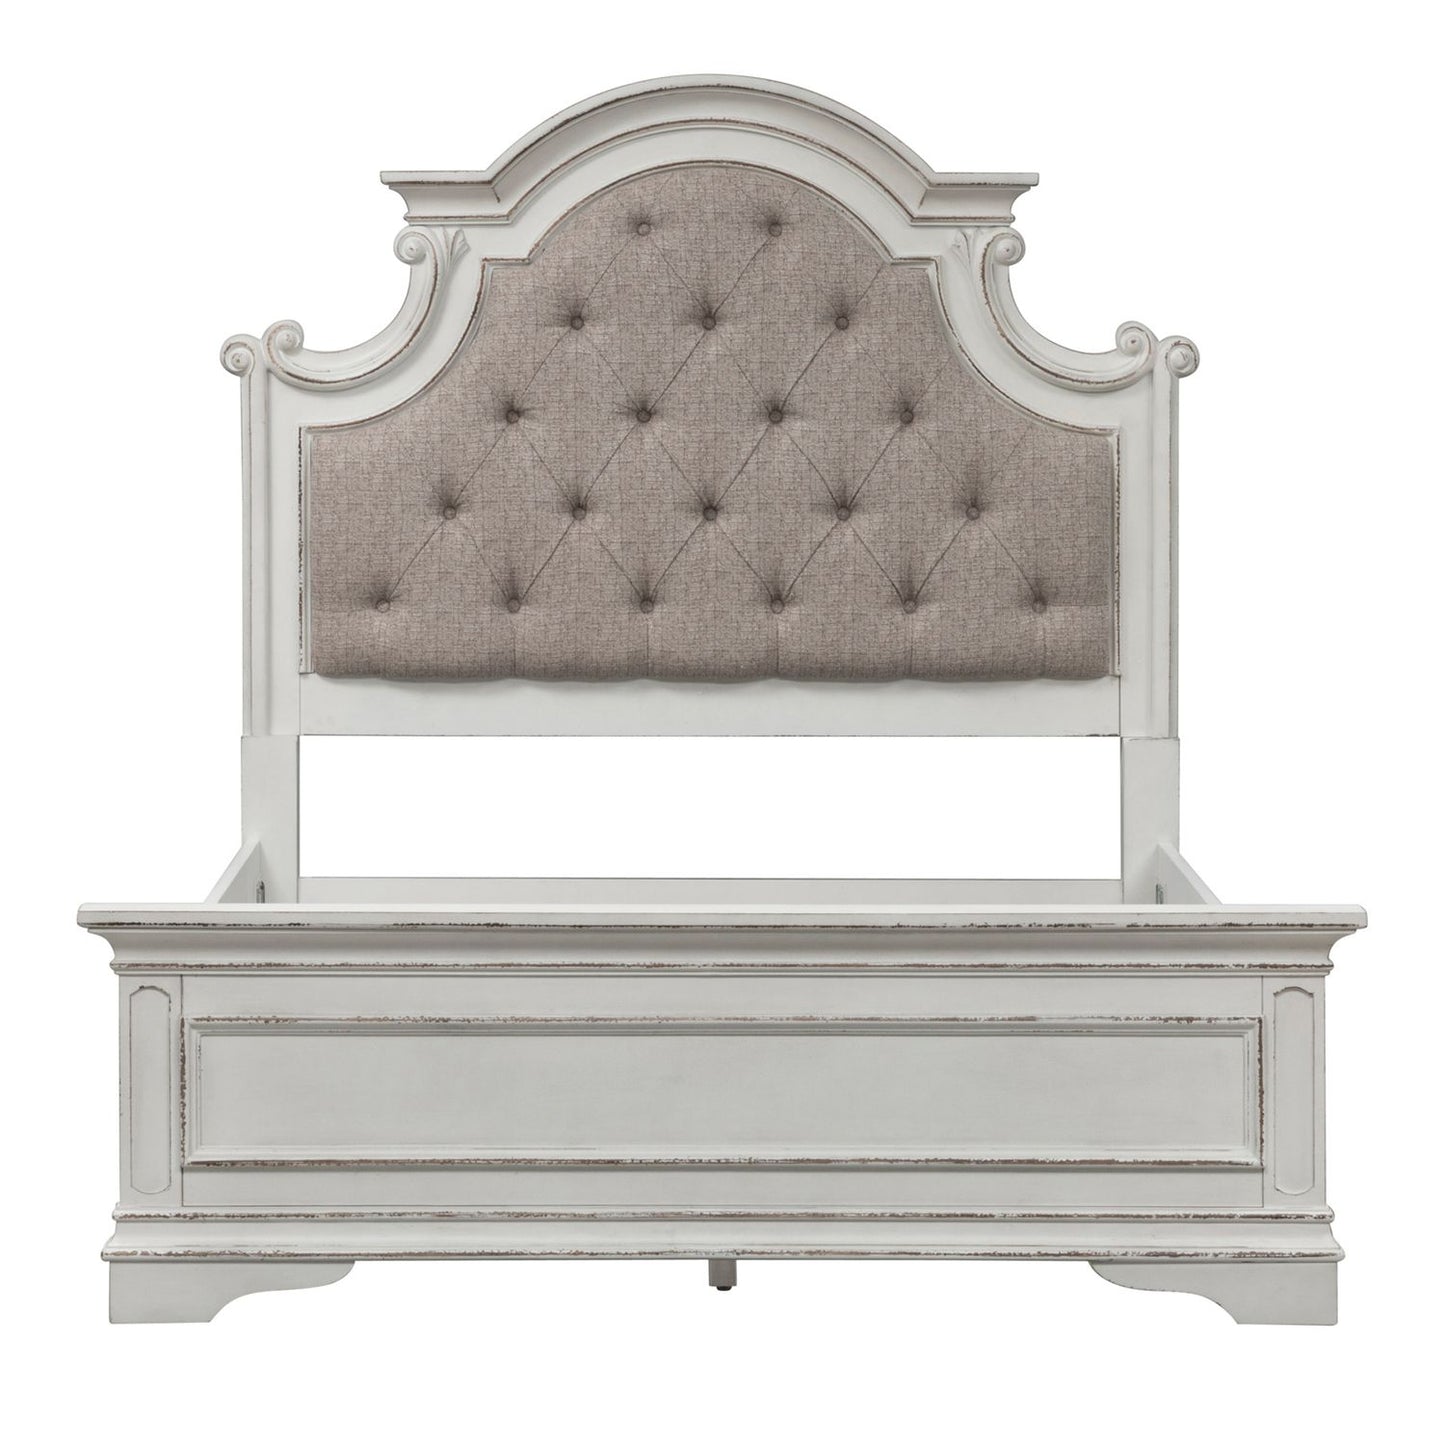 Magnolia Manor - Full Upholstered Bed